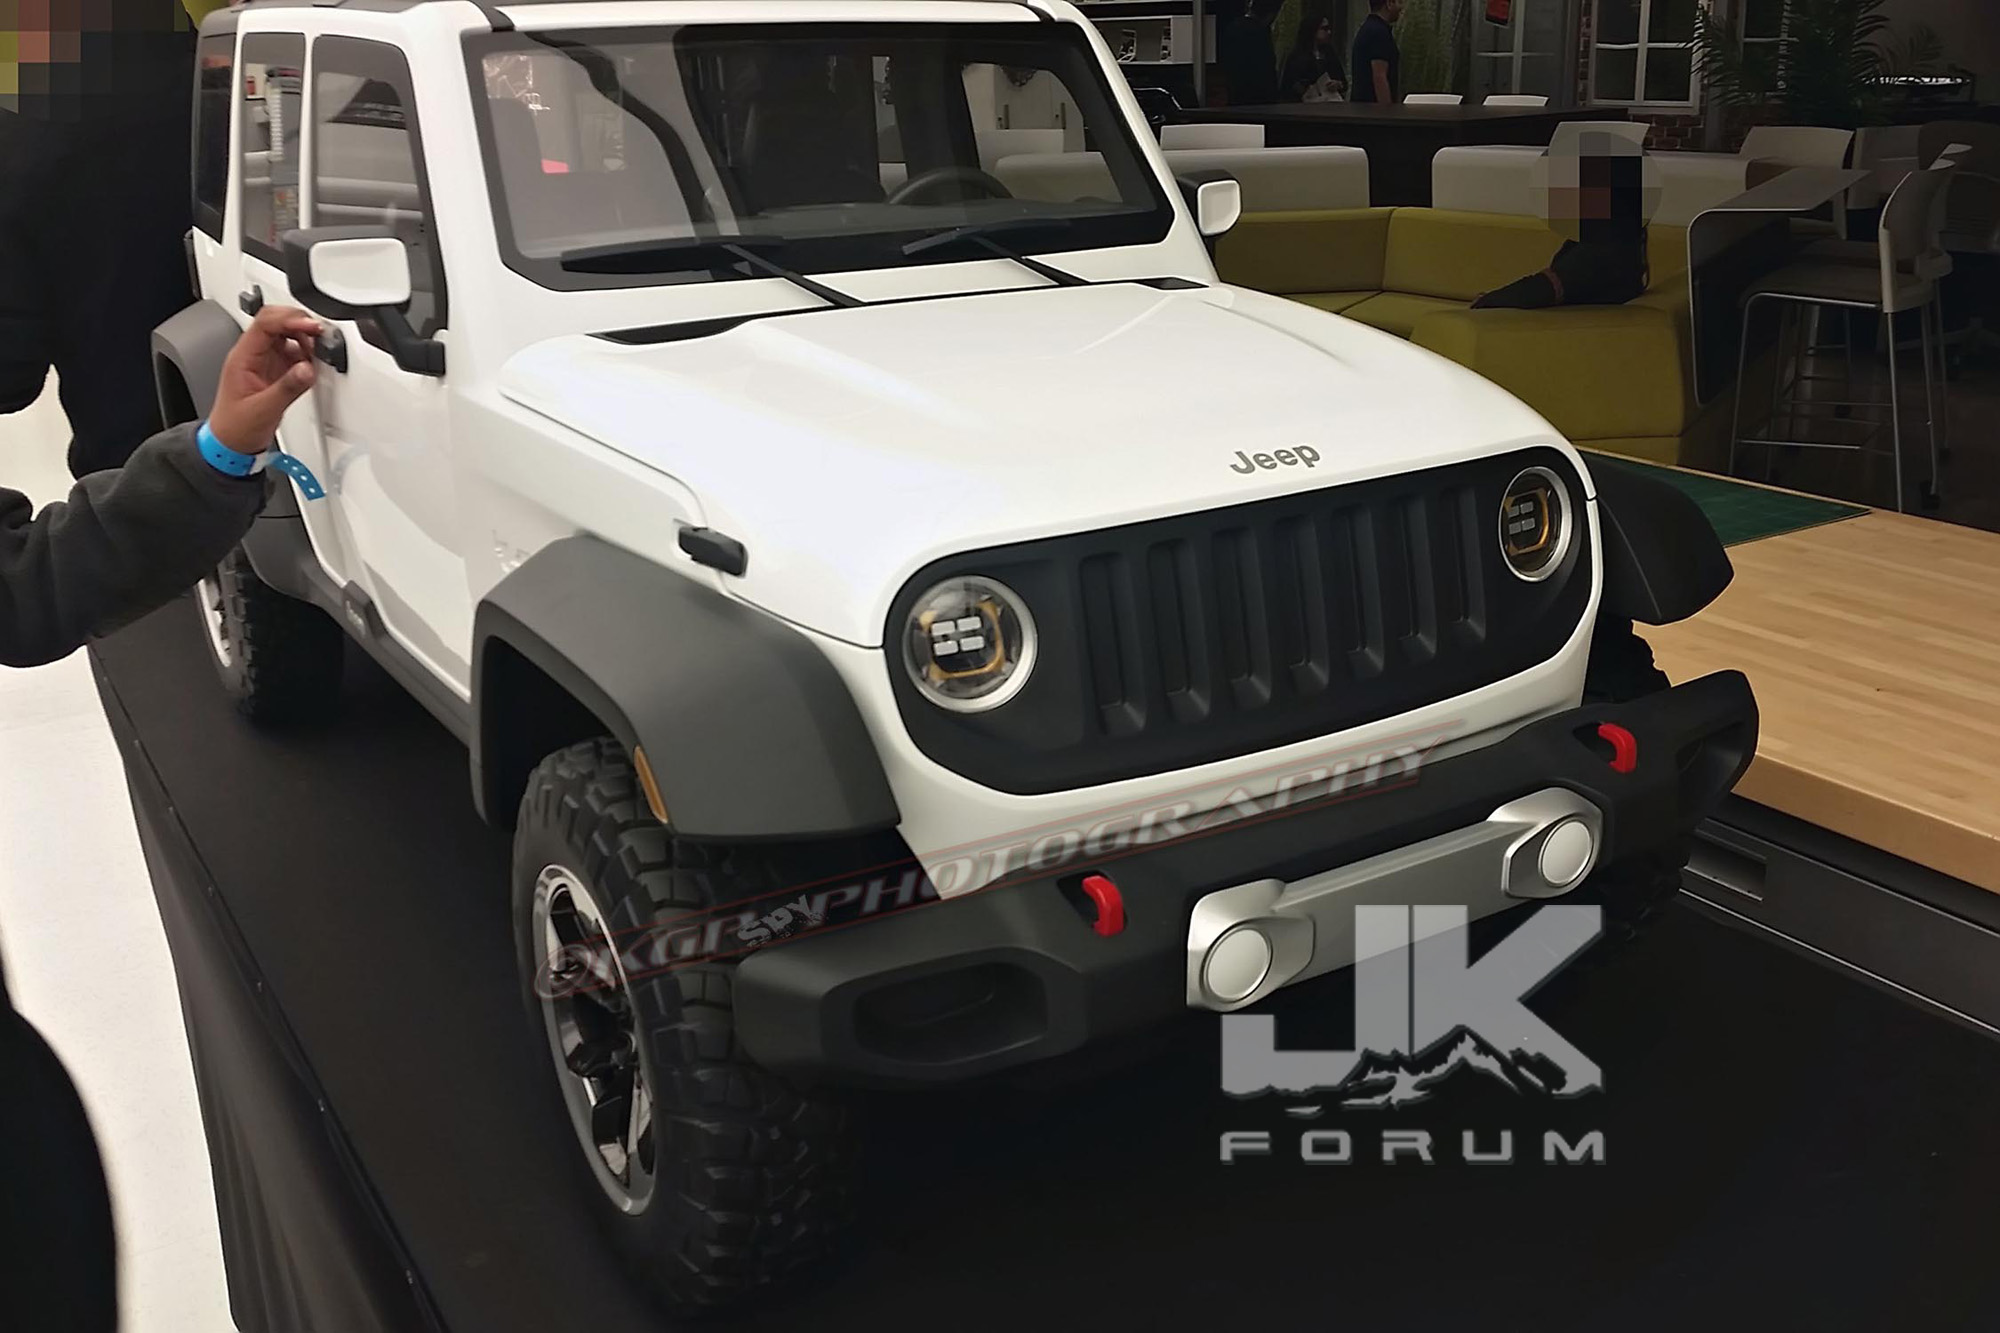 Is This a Completely Undisguised JL Wrangler?